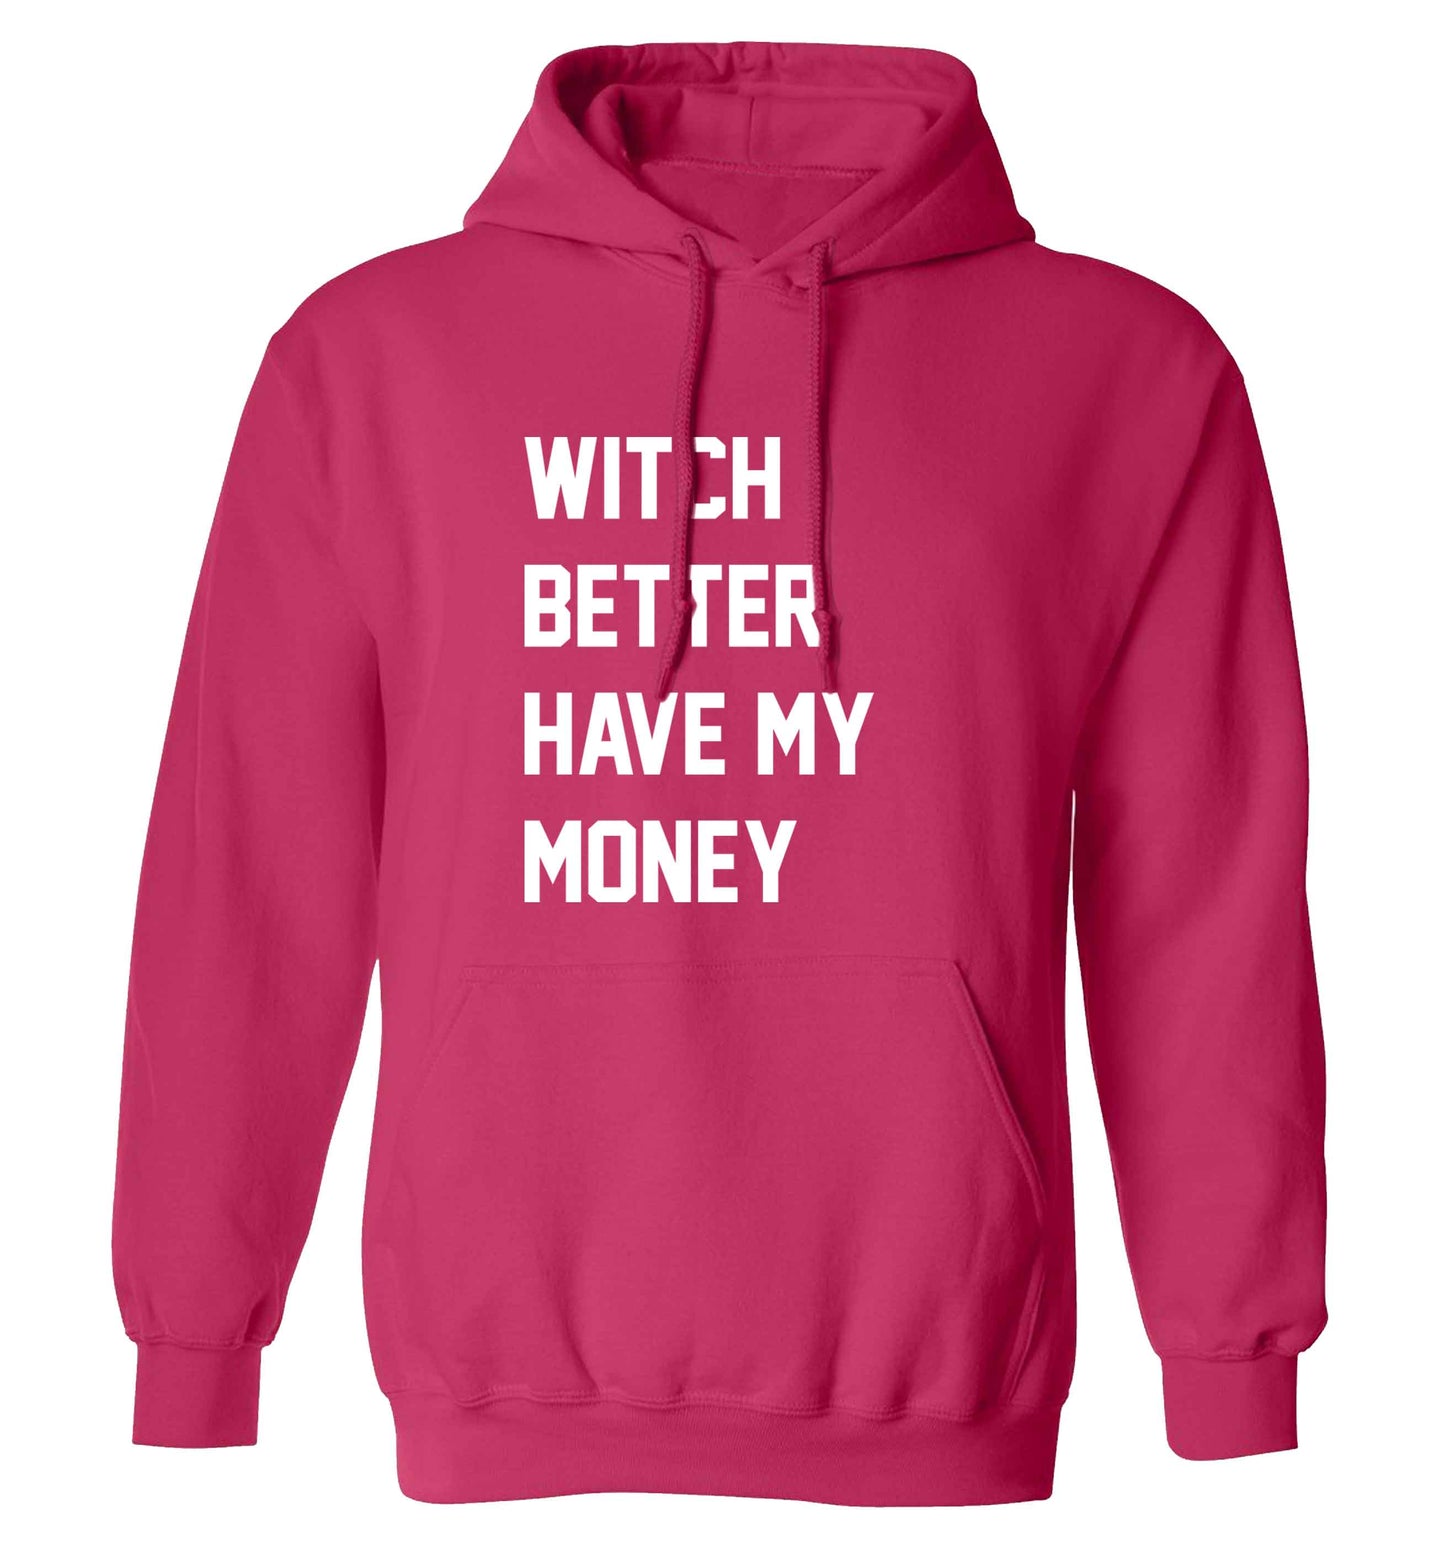 Witch better have my money adults unisex pink hoodie 2XL